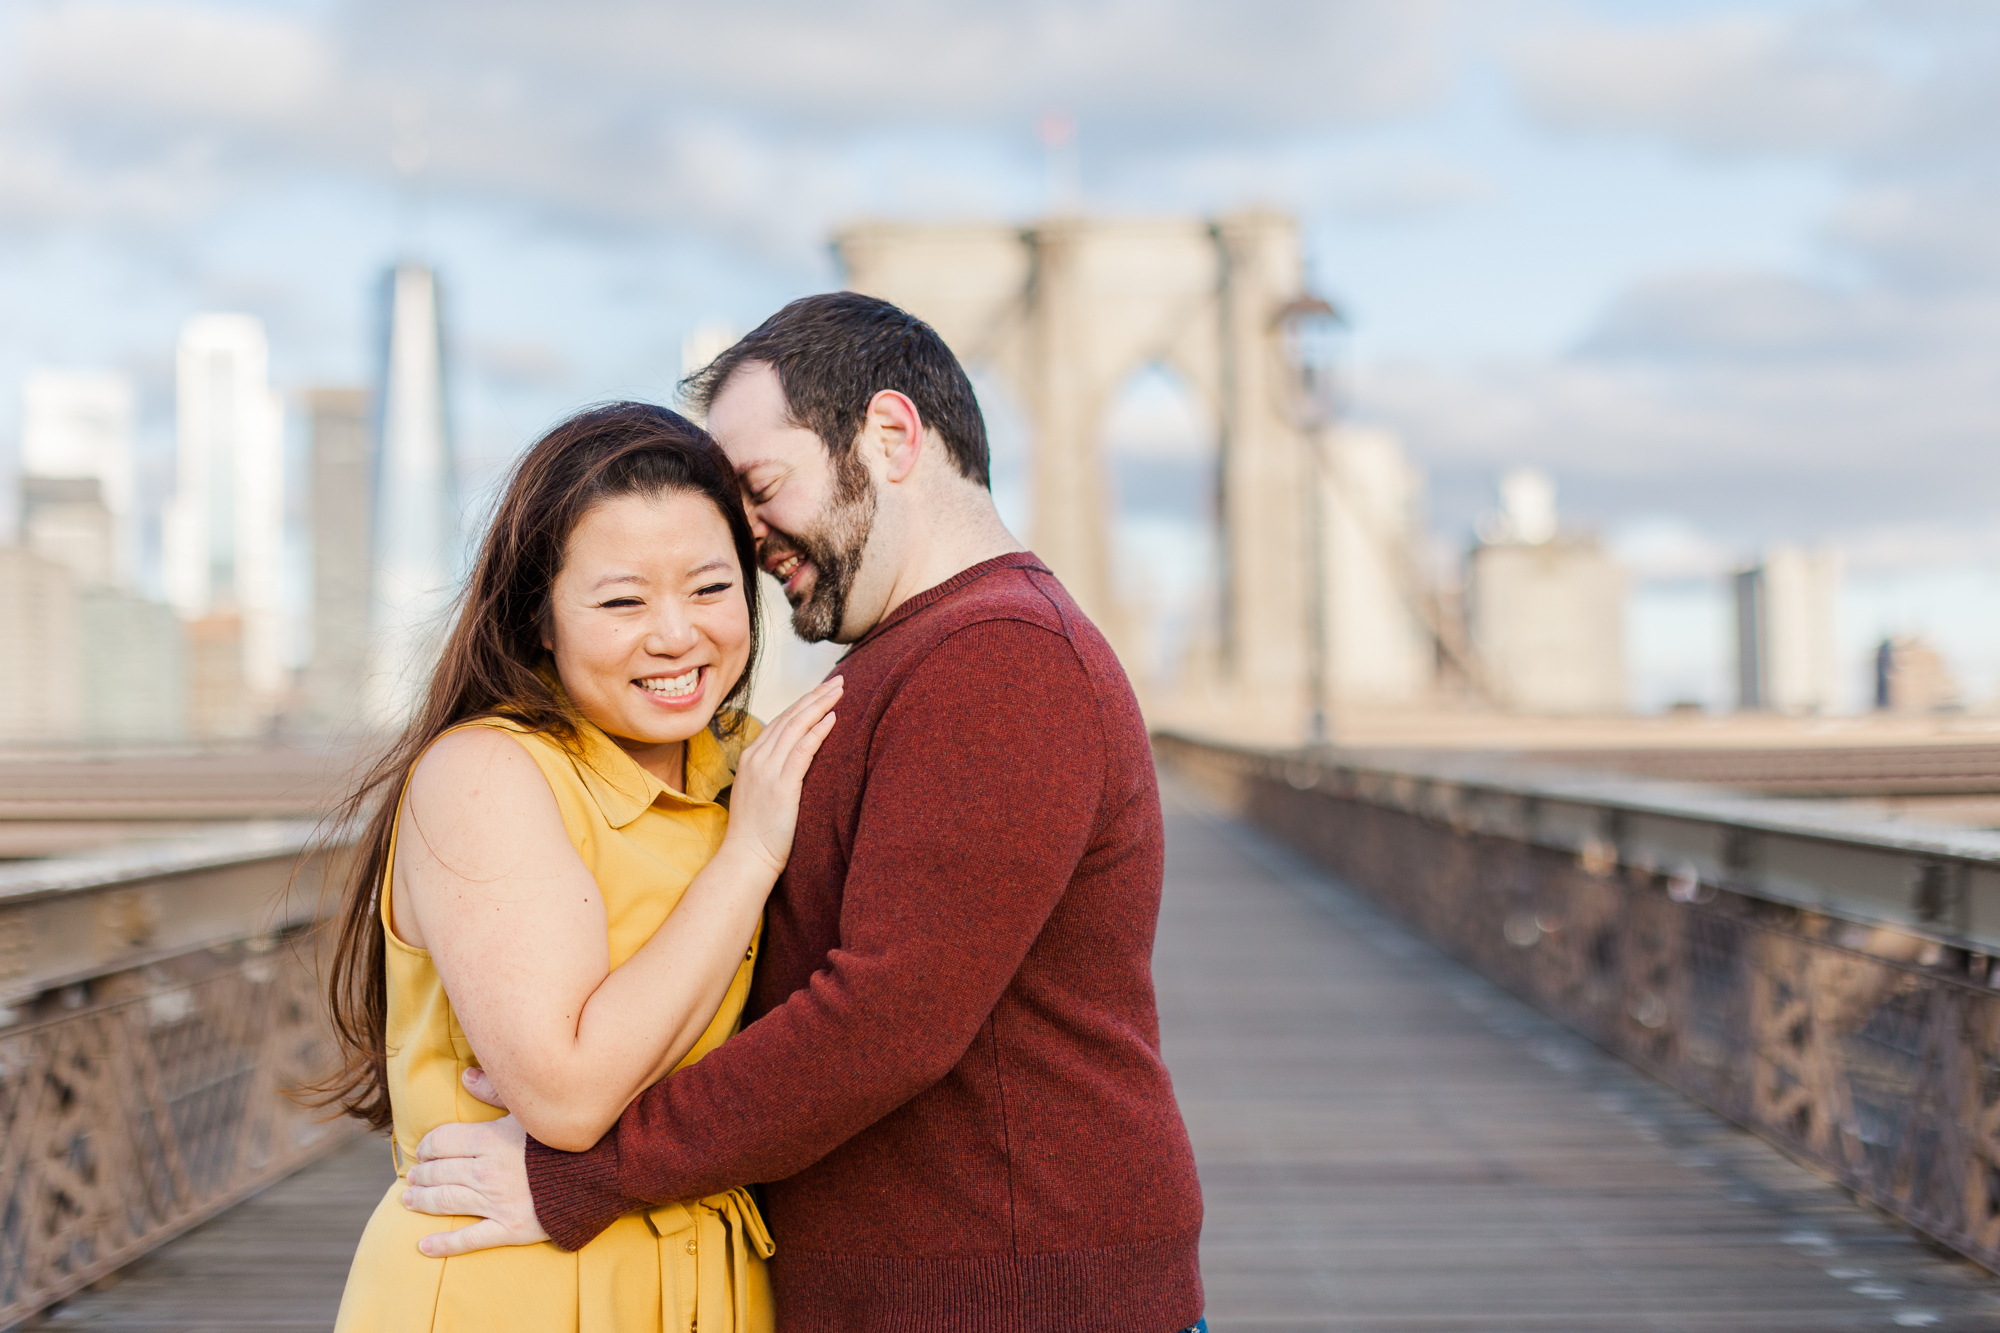 Beautiful Brooklyn Bridge Engagement Photography with Matching Outfits